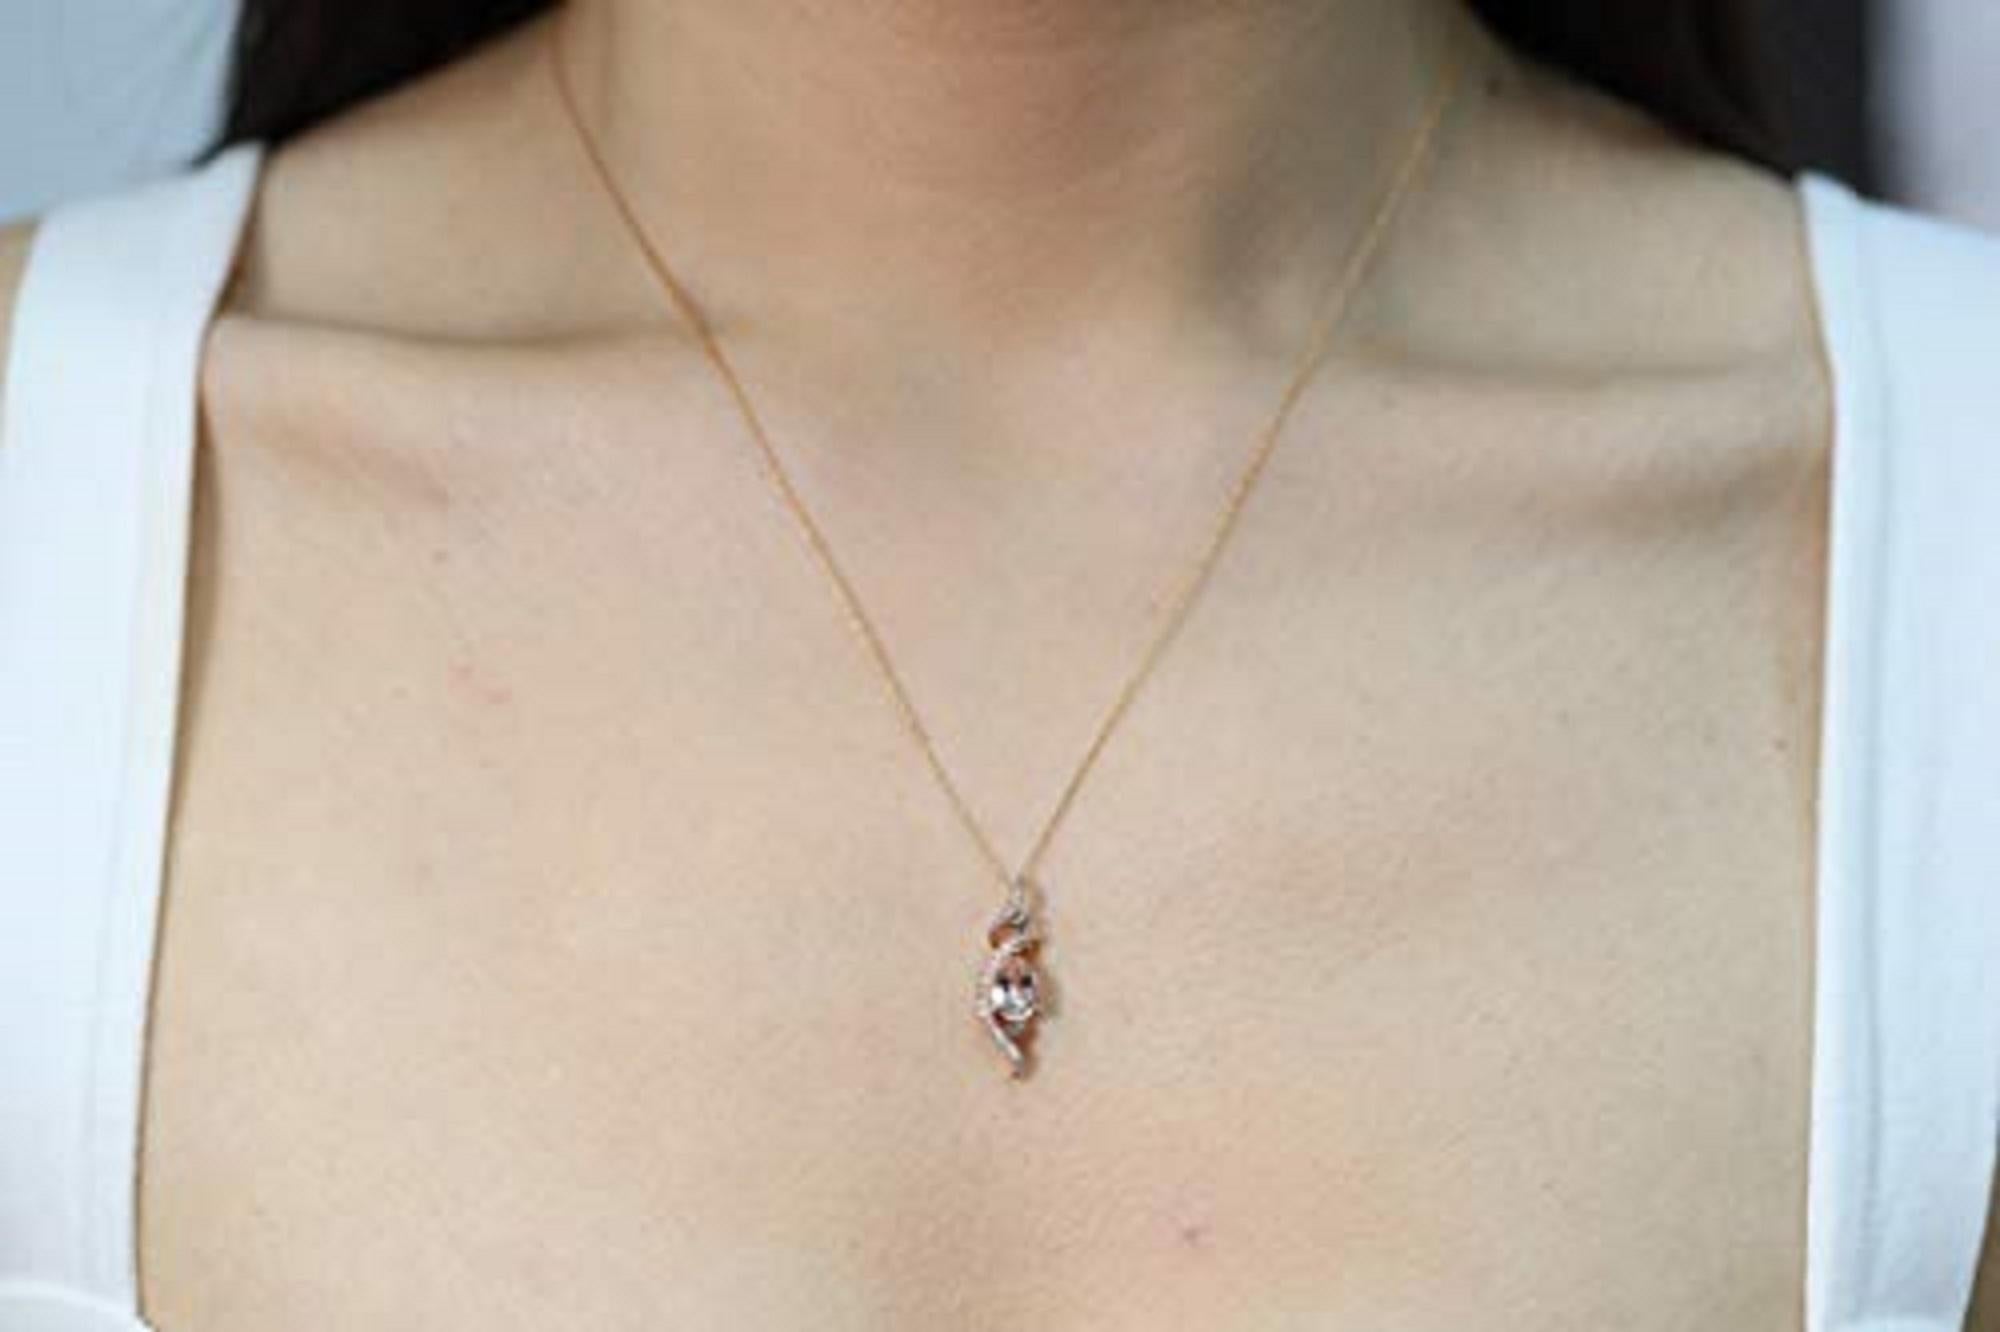 Decorate yourself in elegance with this Pendant is crafted from 10-karat Rose Gold by Gin & Grace Pendant. This Pendant is made up of 6X8 Pear-Cut Prong setting Genuine Morganite (1 Pcs) 0.88 Carat and Round-Cut Prong setting Natural Brown Diamond